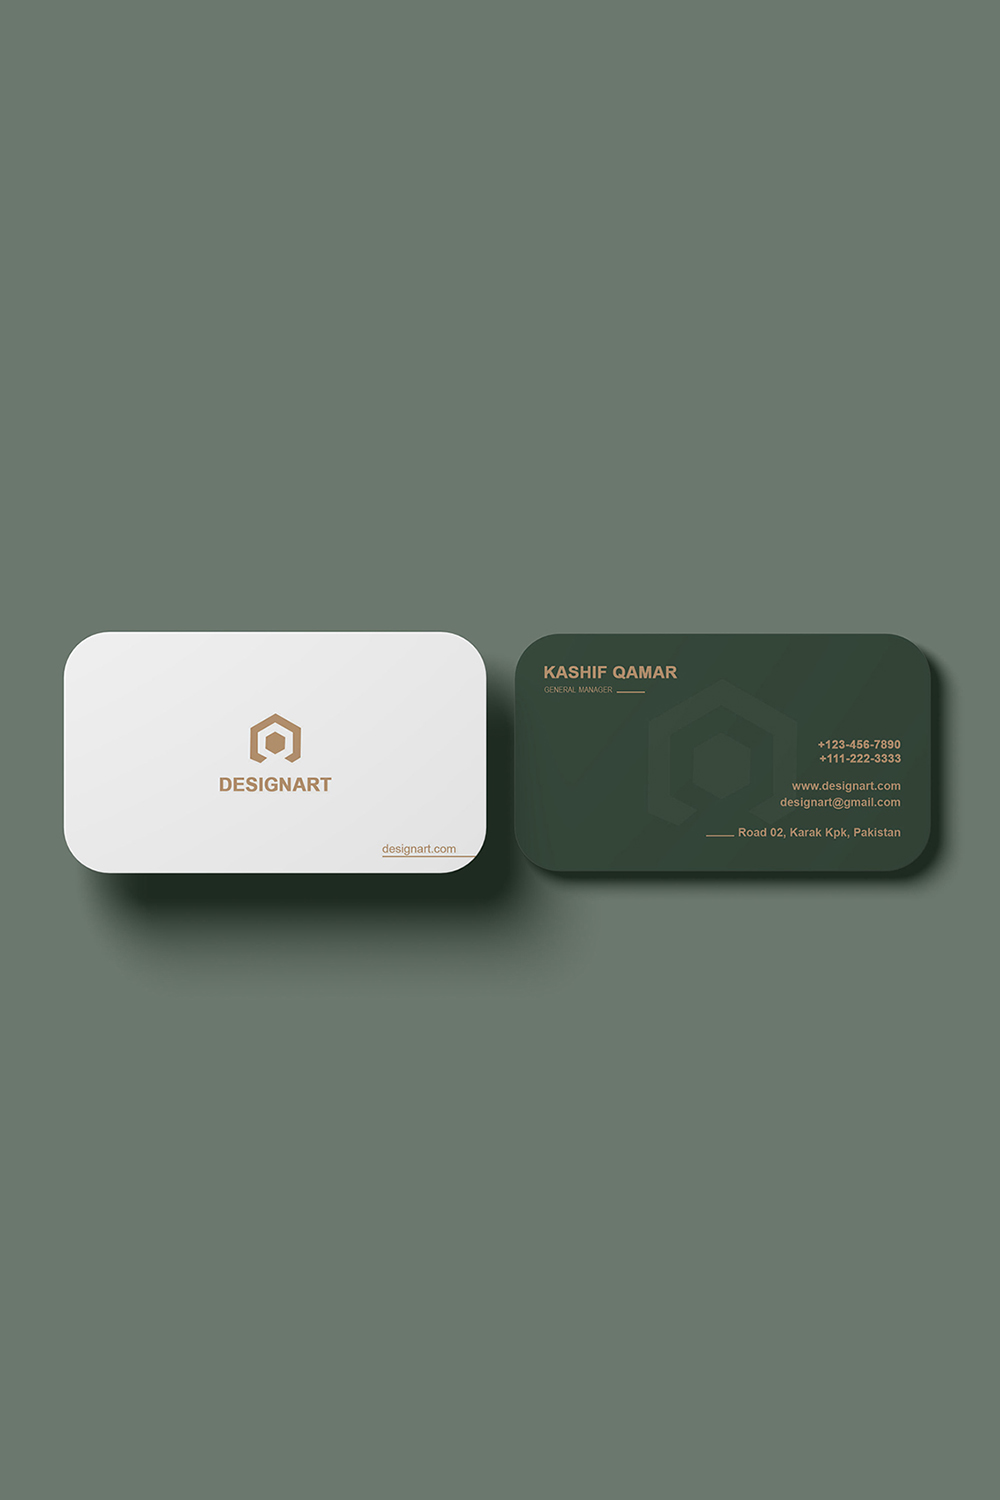 Modern and Clean Professional Business Card Pinterest image.